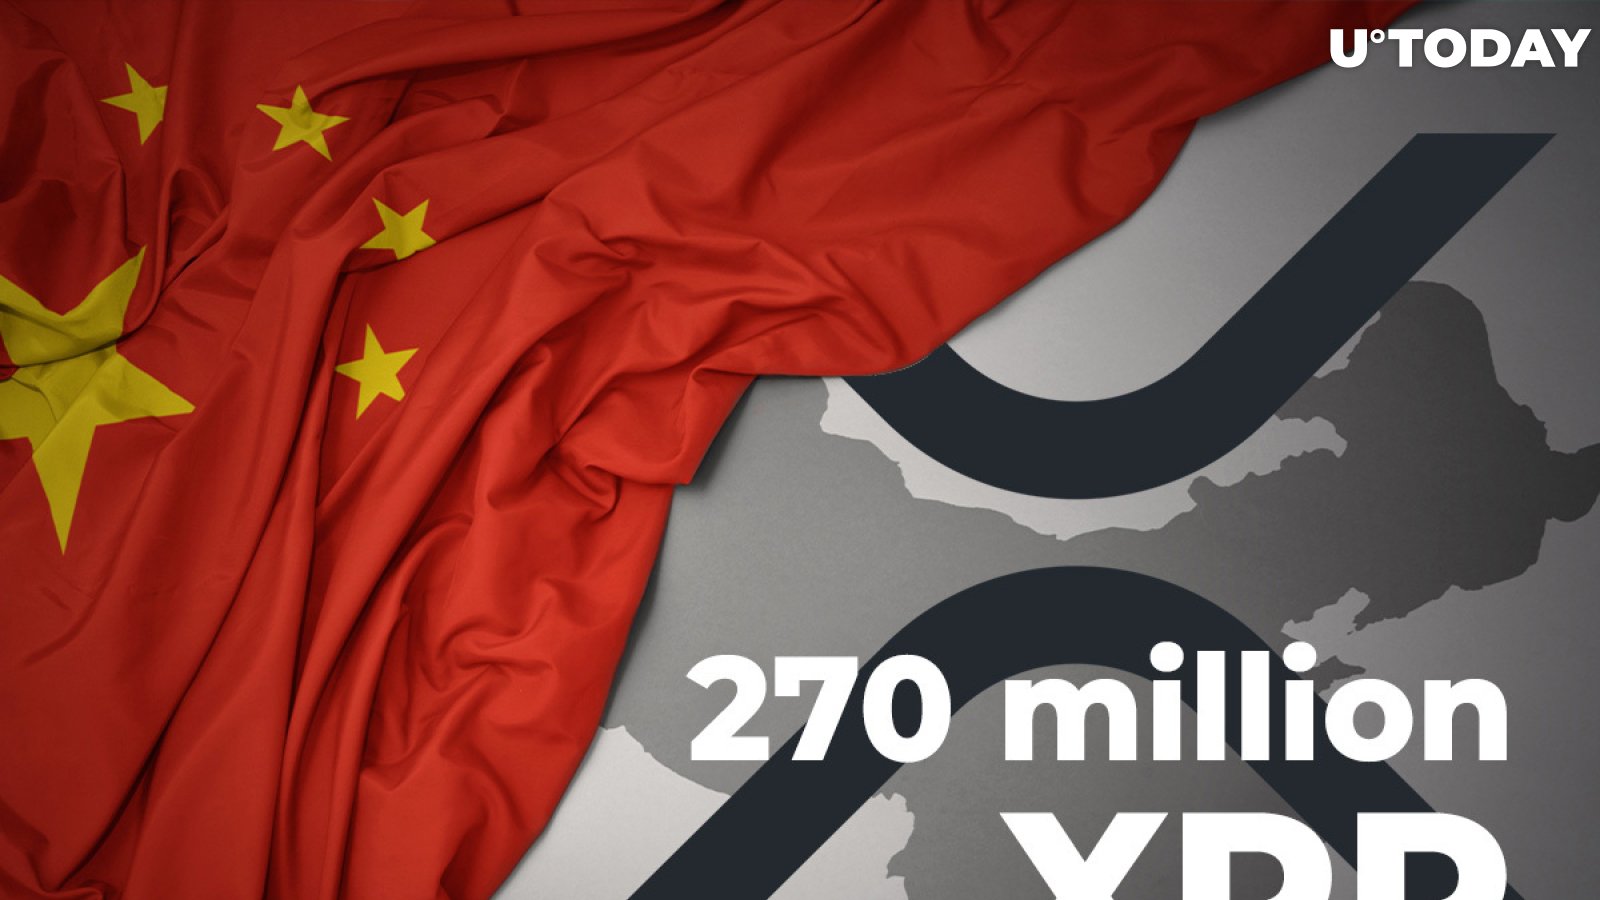 270 Million XRP Shifted by Top Crypto Exchanges As Ripple Keeps Moving XRP to China